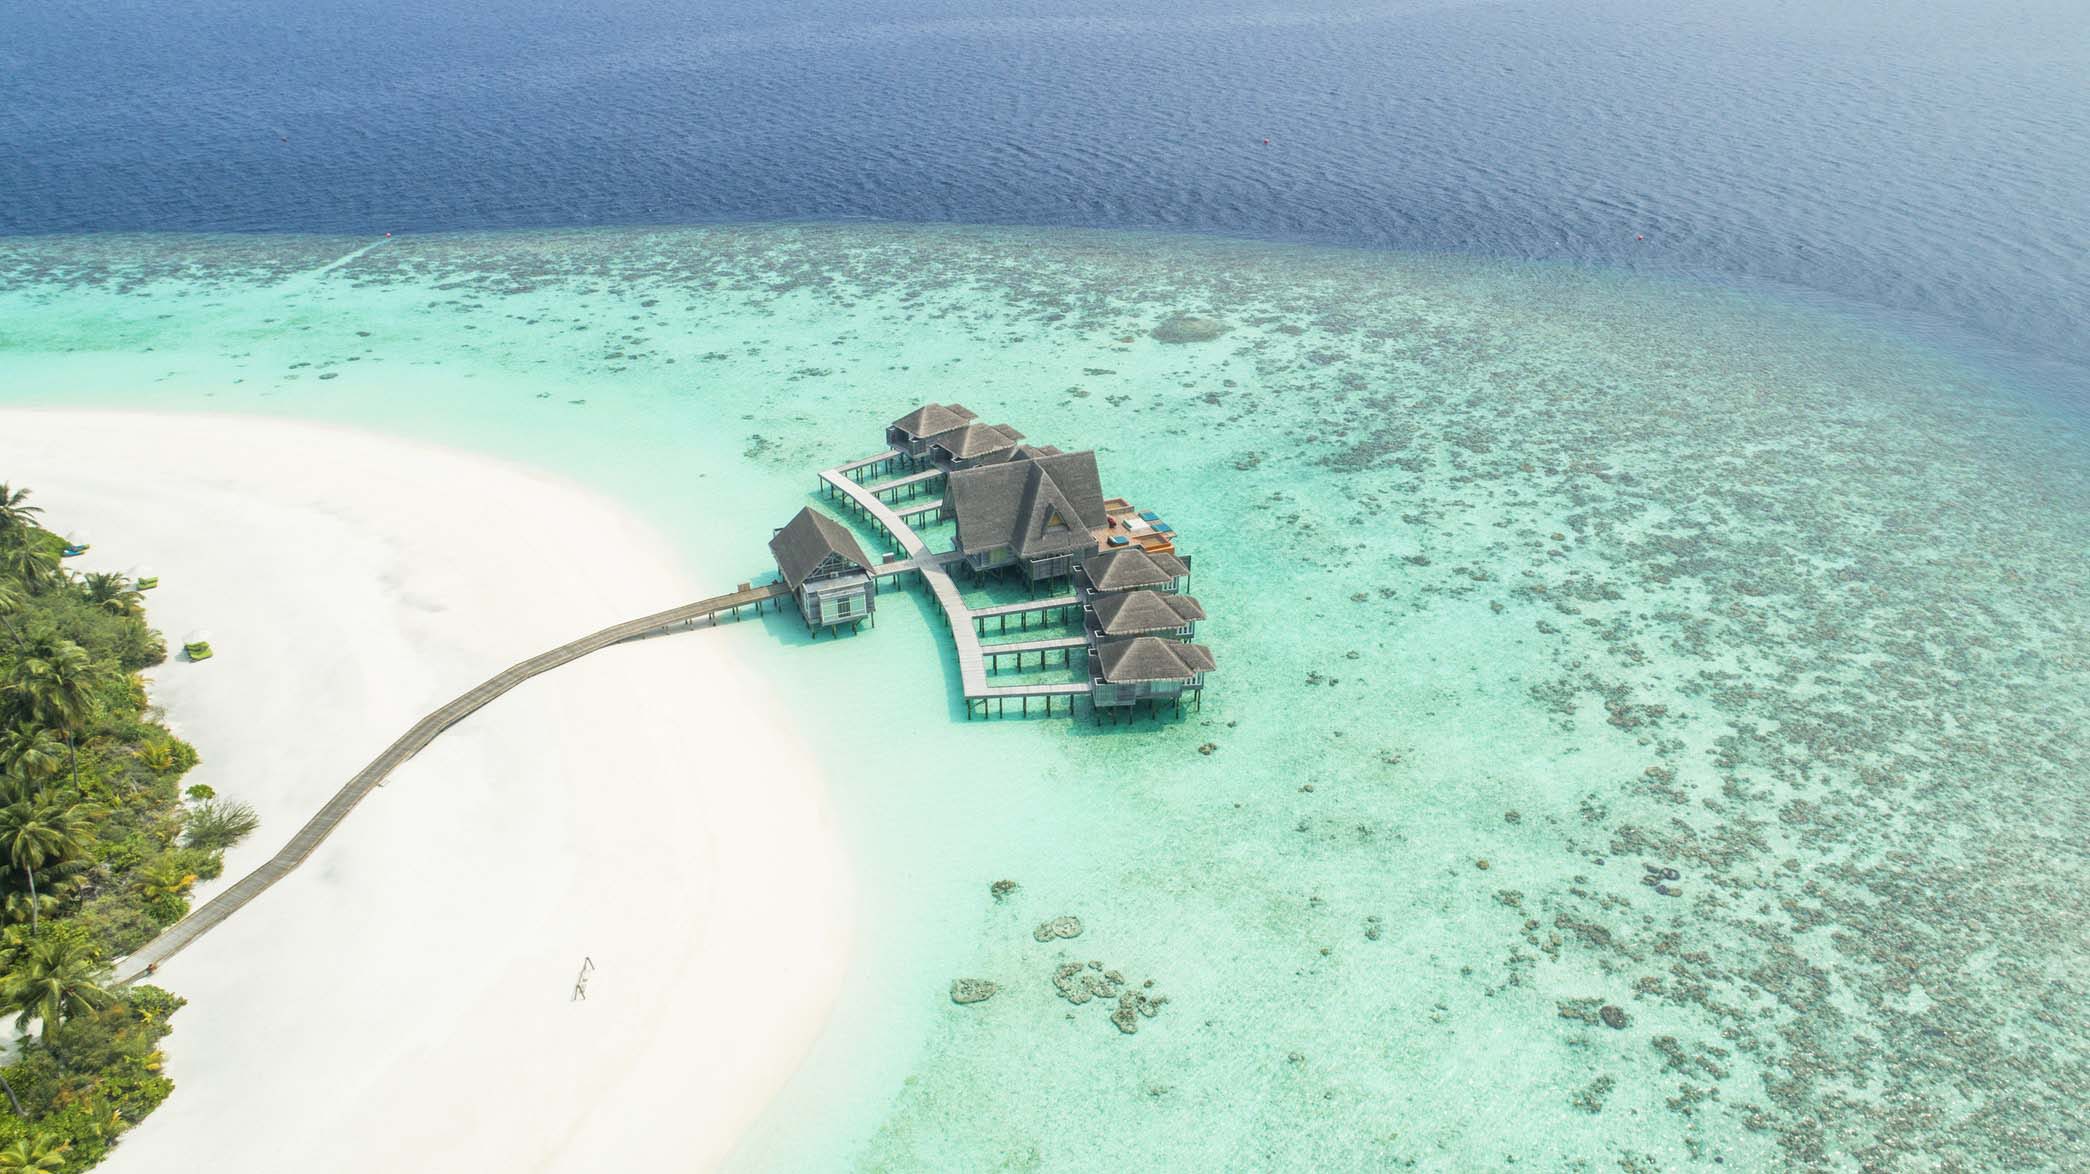 Maldives is a luxurious tropical paradise